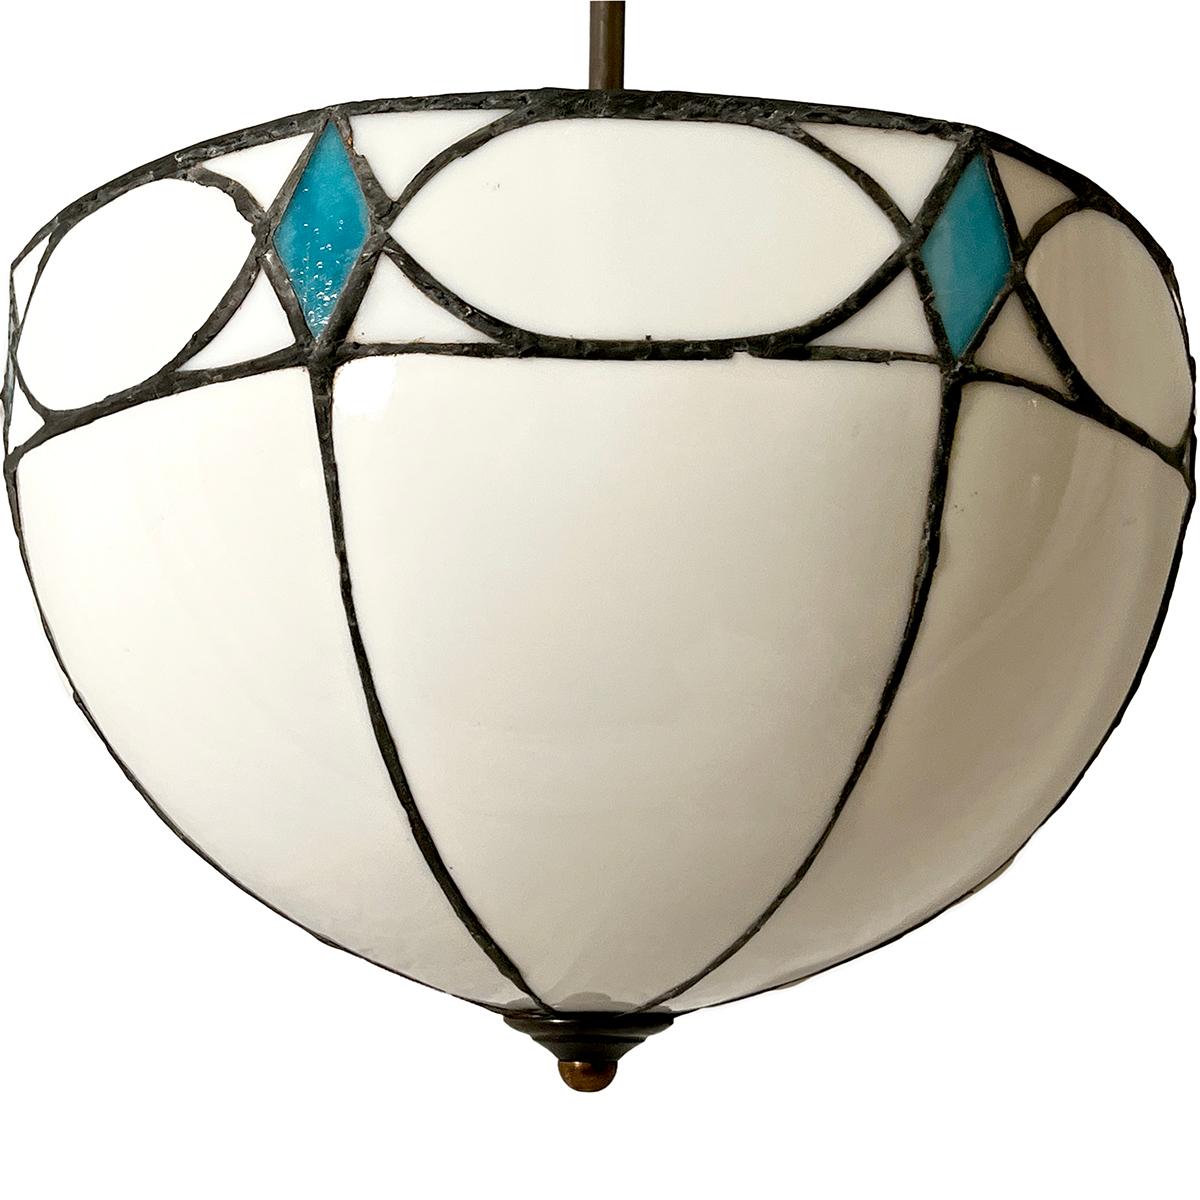 A set of six circa 1920’s English leaded glass light fixture with 4 interior lights each and blue glass details. Sold individually.

Measurements:
Height: 16″
Diameter: 16″